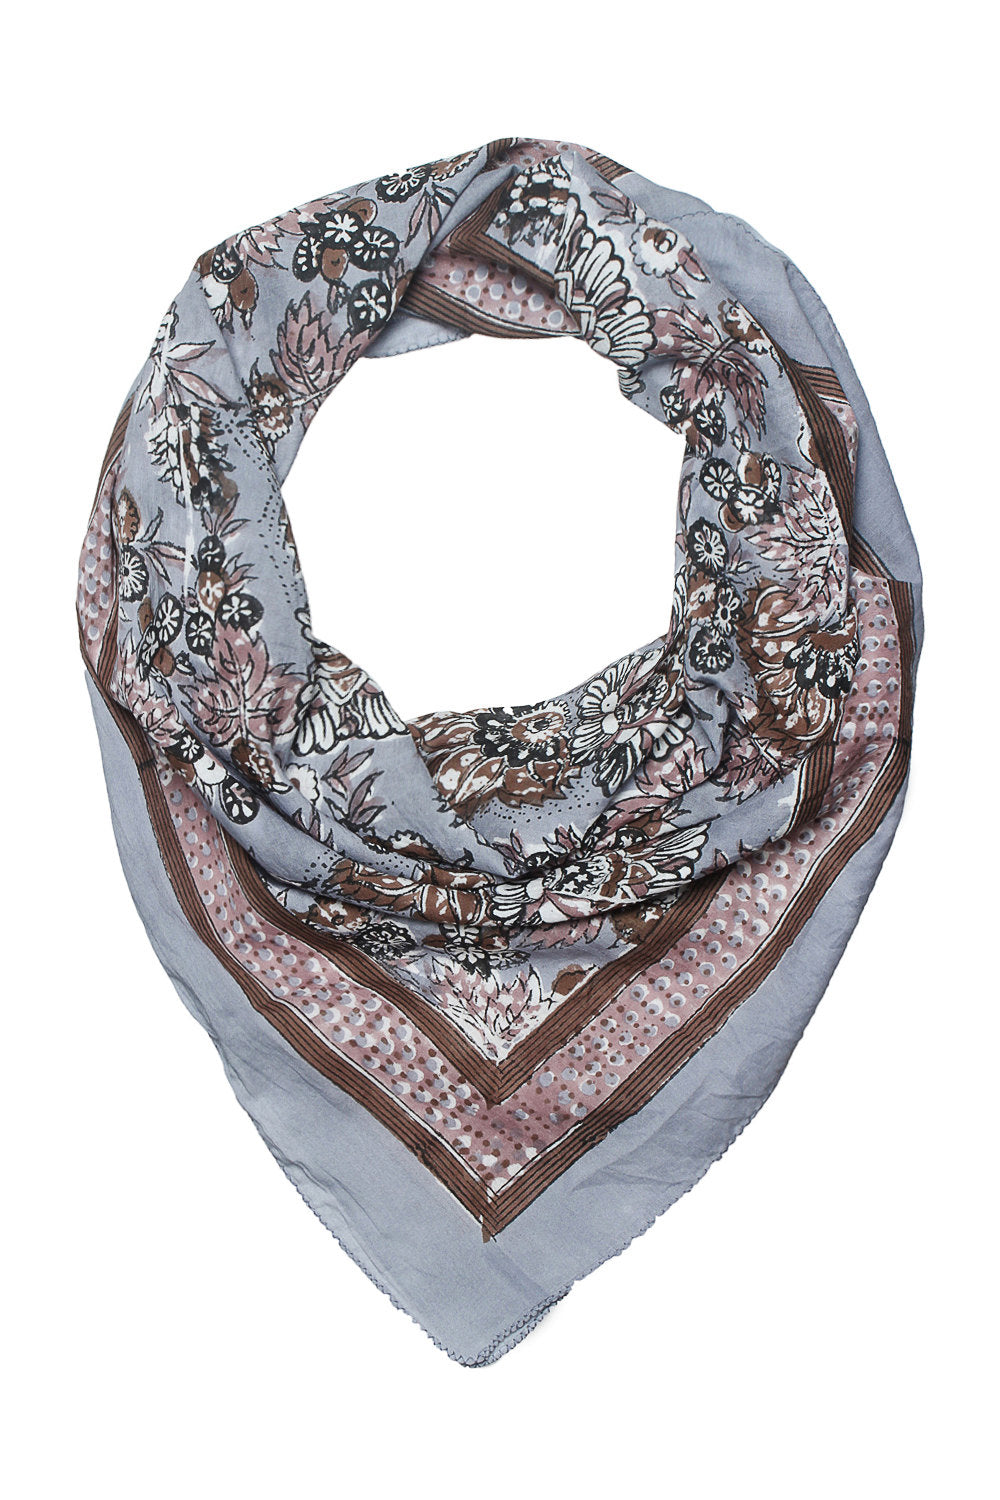 Soft cotton hand block printed scarf in gray color